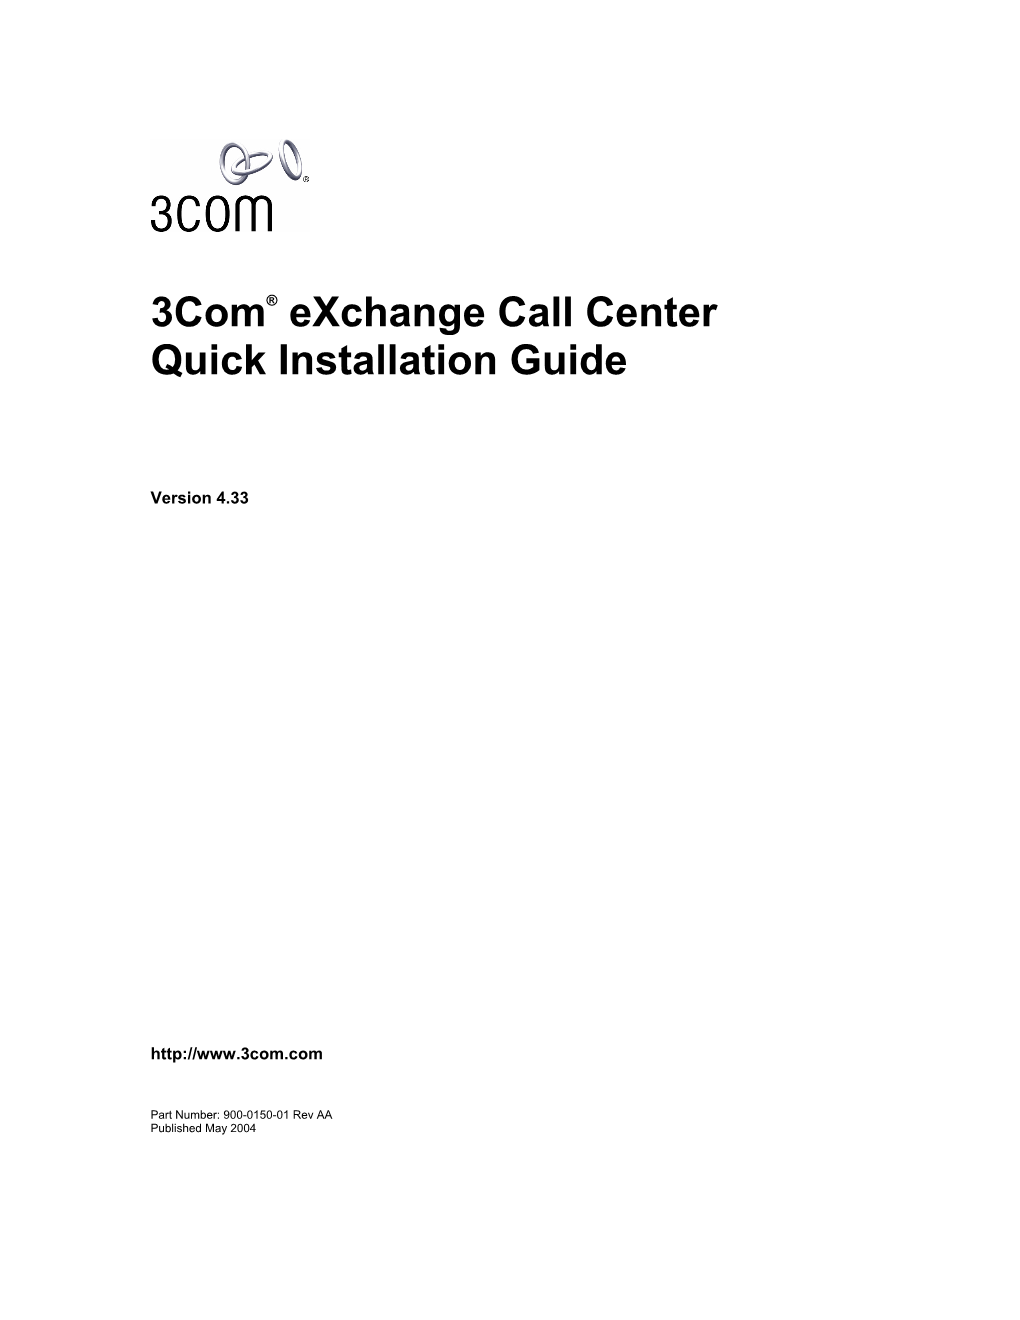 3Com Exchange Call Center Quick Installation Guide (This Guide)